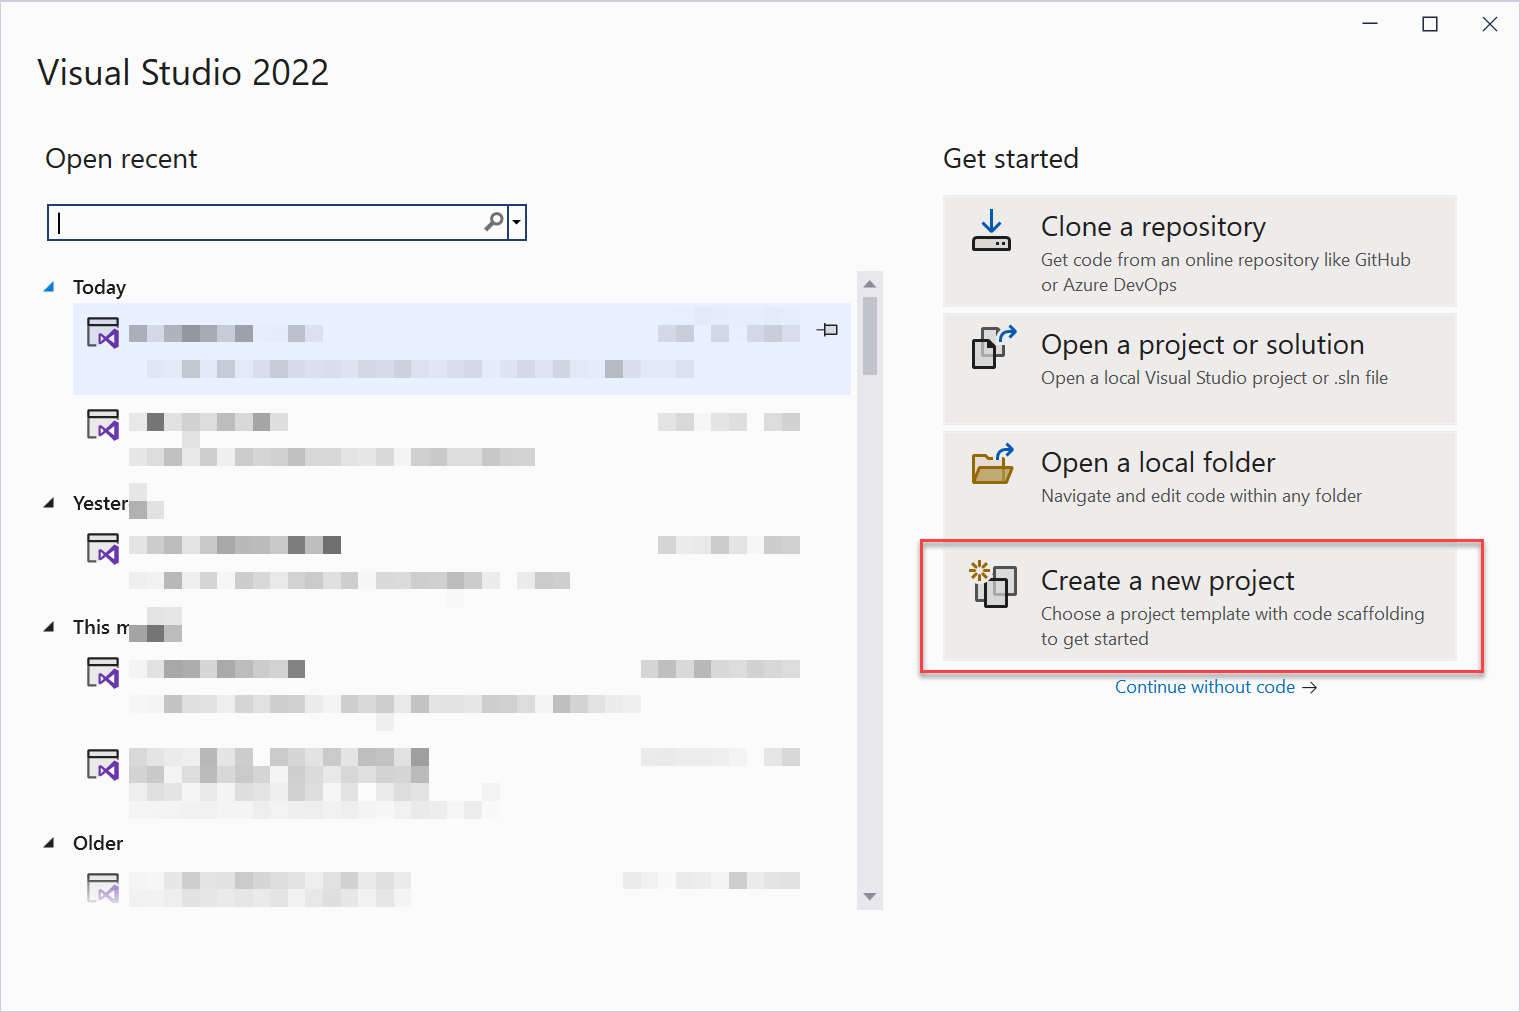 The Visual Studio 2022 dialog displays with the option to Create a new project highlighted.